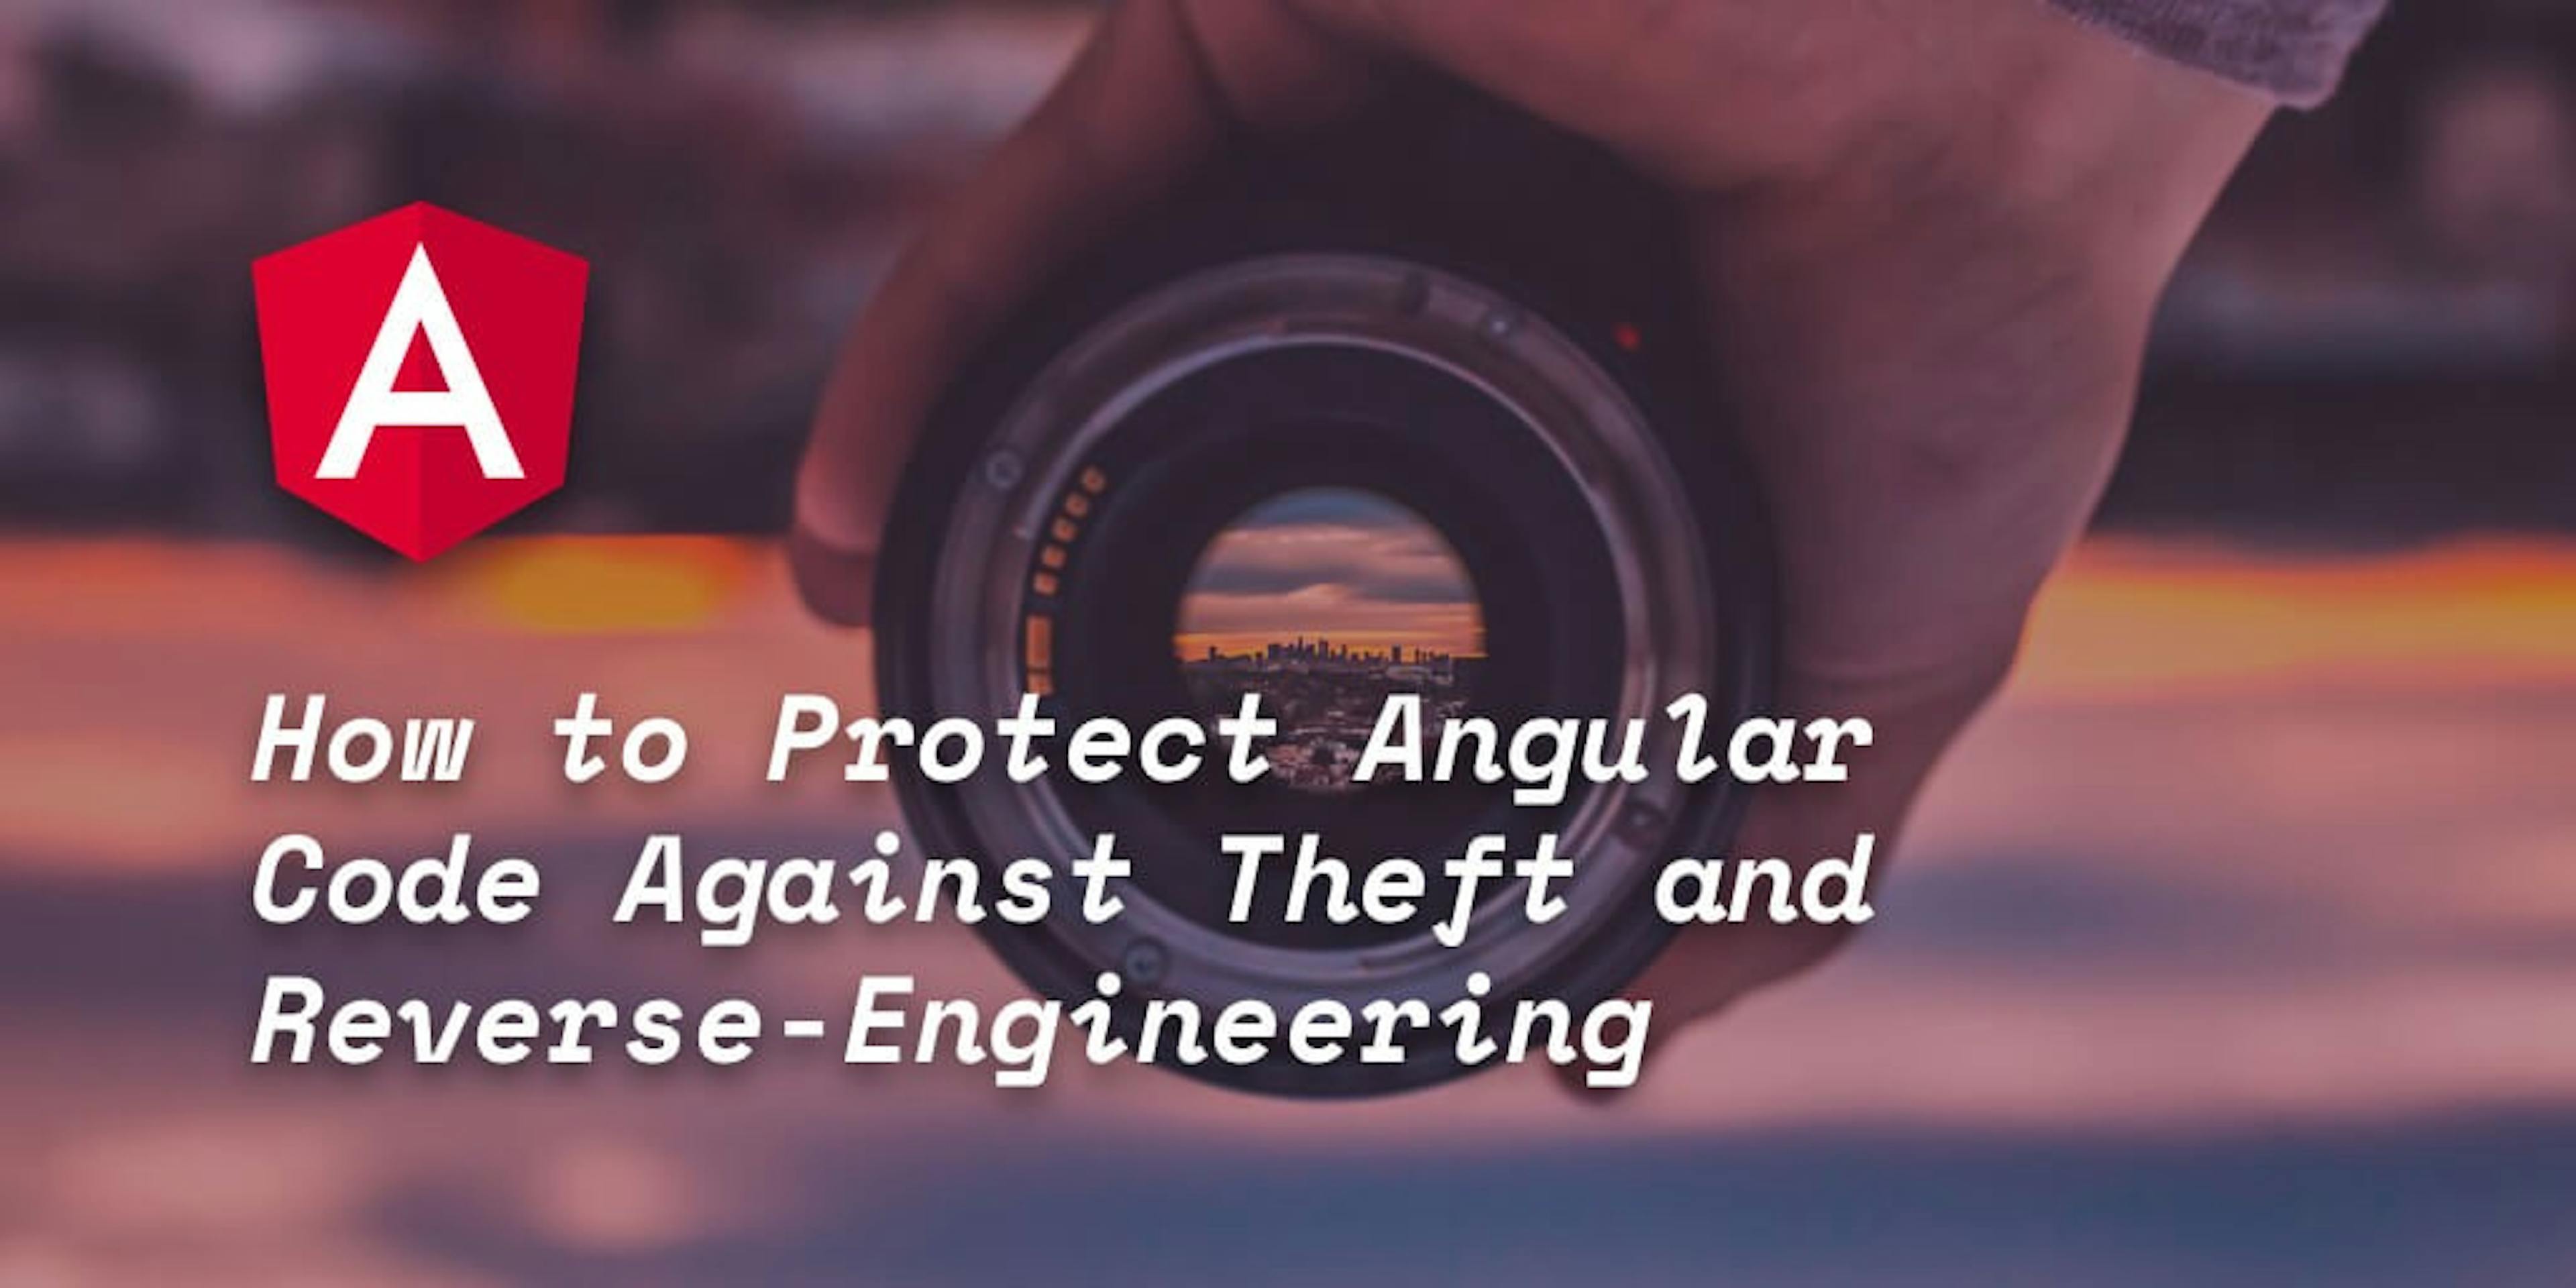 /how-to-protect-angular-code-against-theft-and-reverse-engineering-7fe218641afe feature image